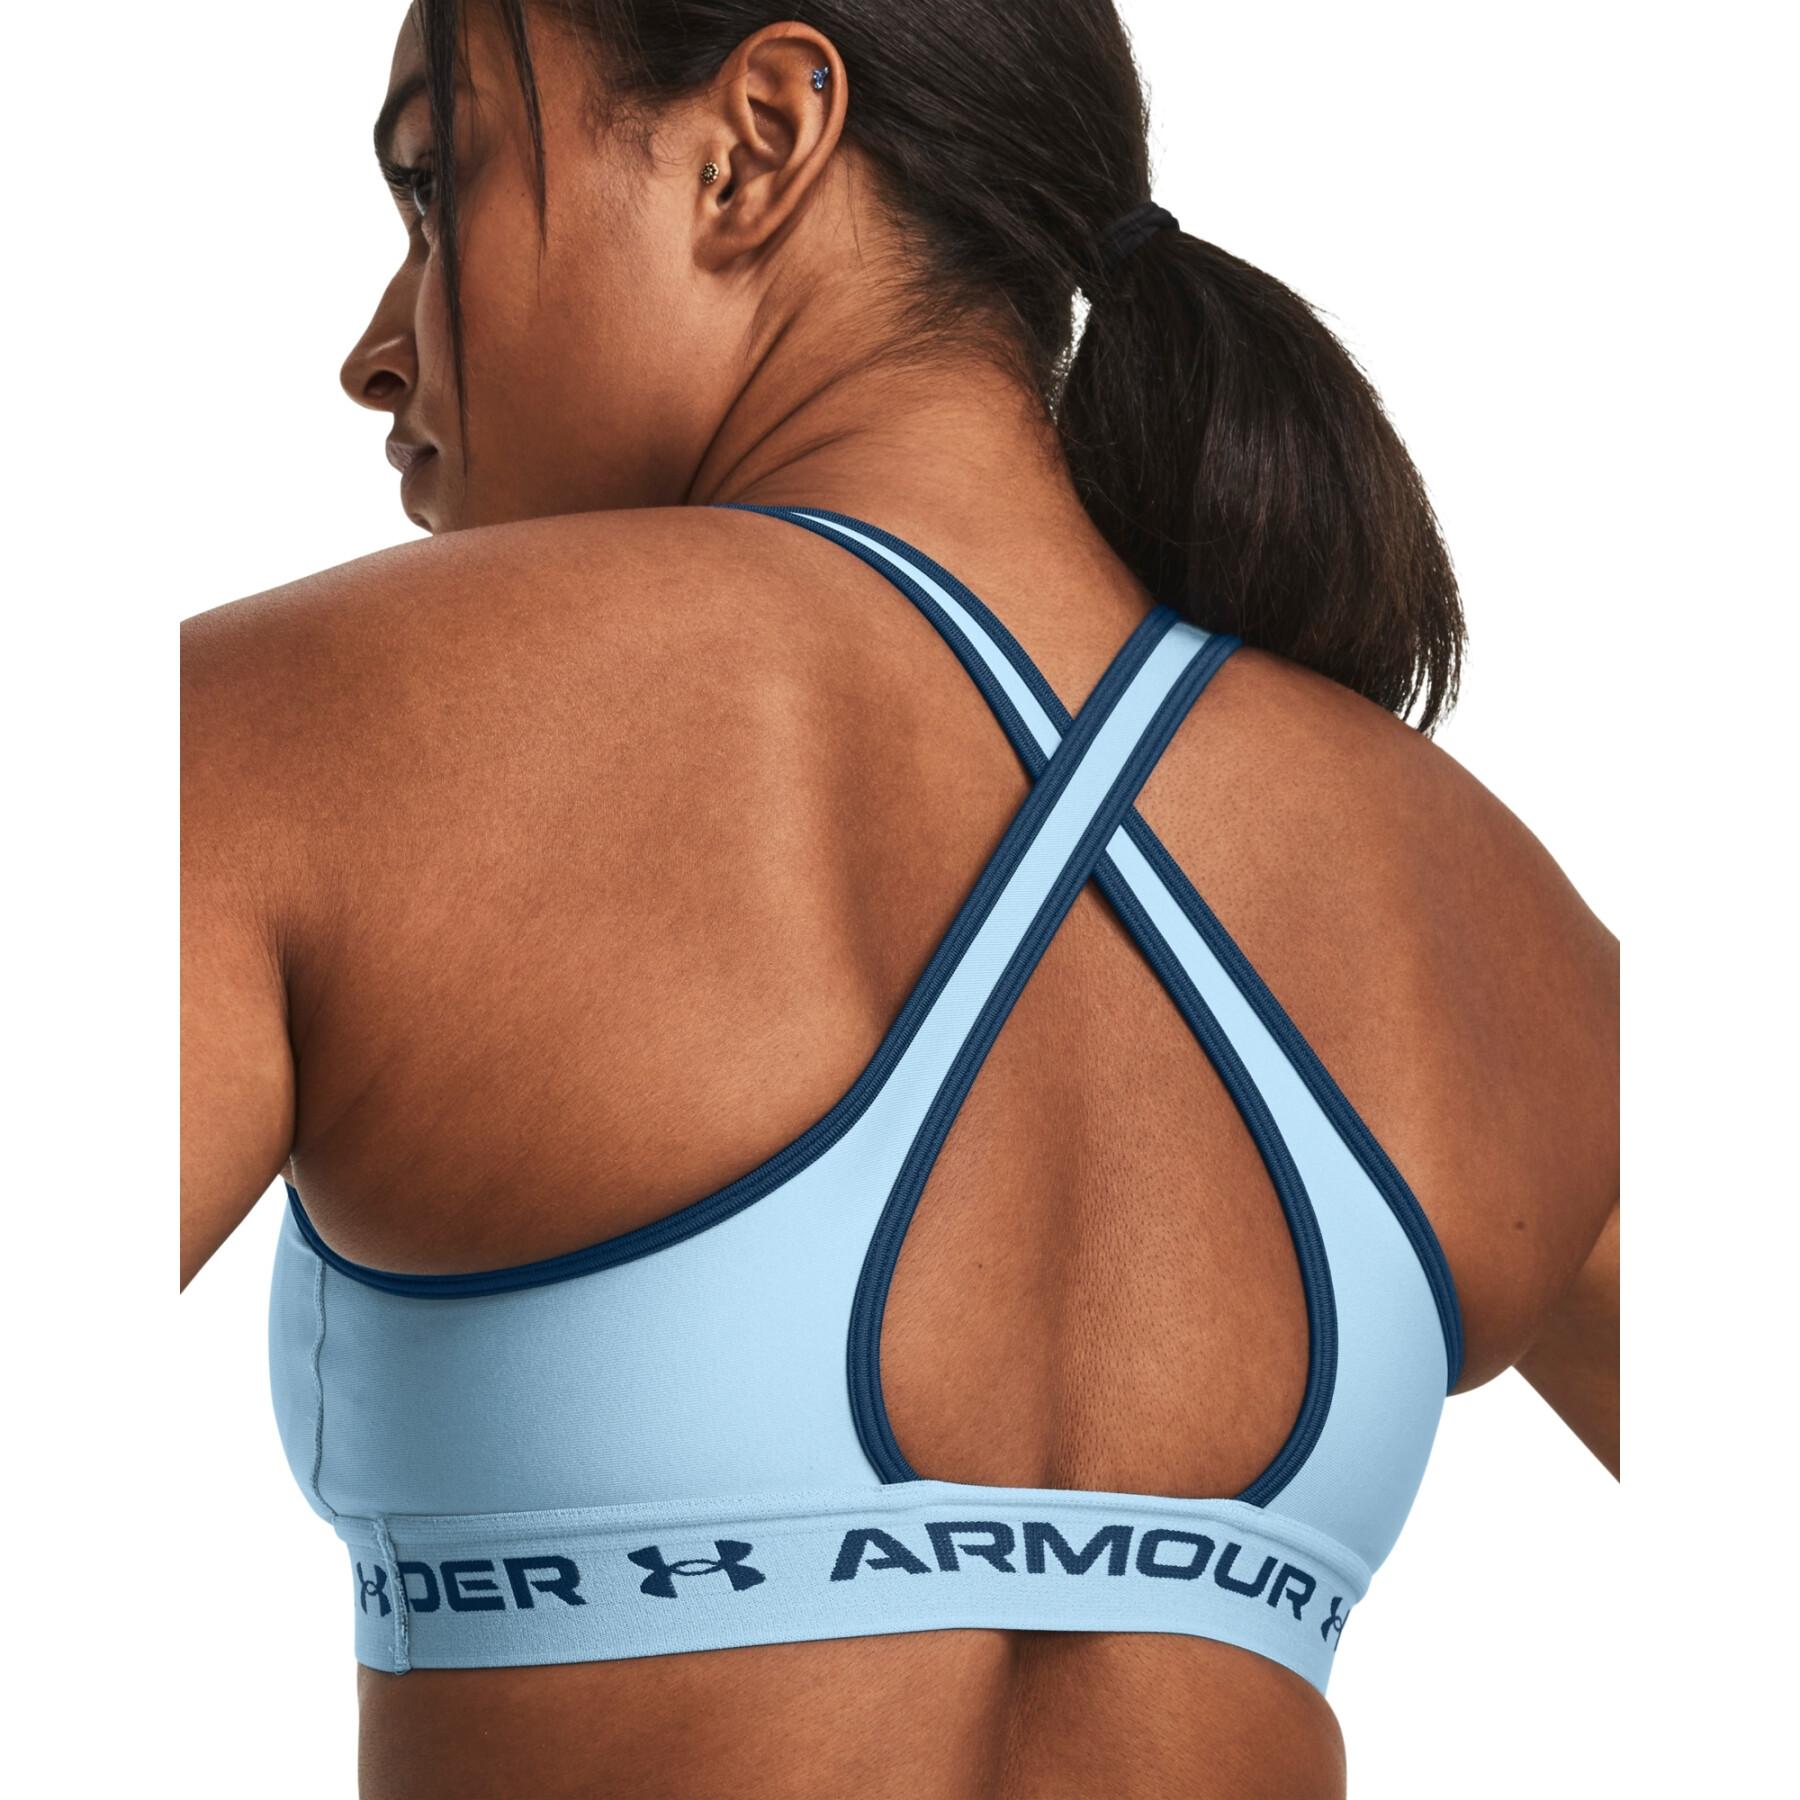 Moderate support bra for women Under Armour Crossback - Bras - Women's  clothing - Fitness